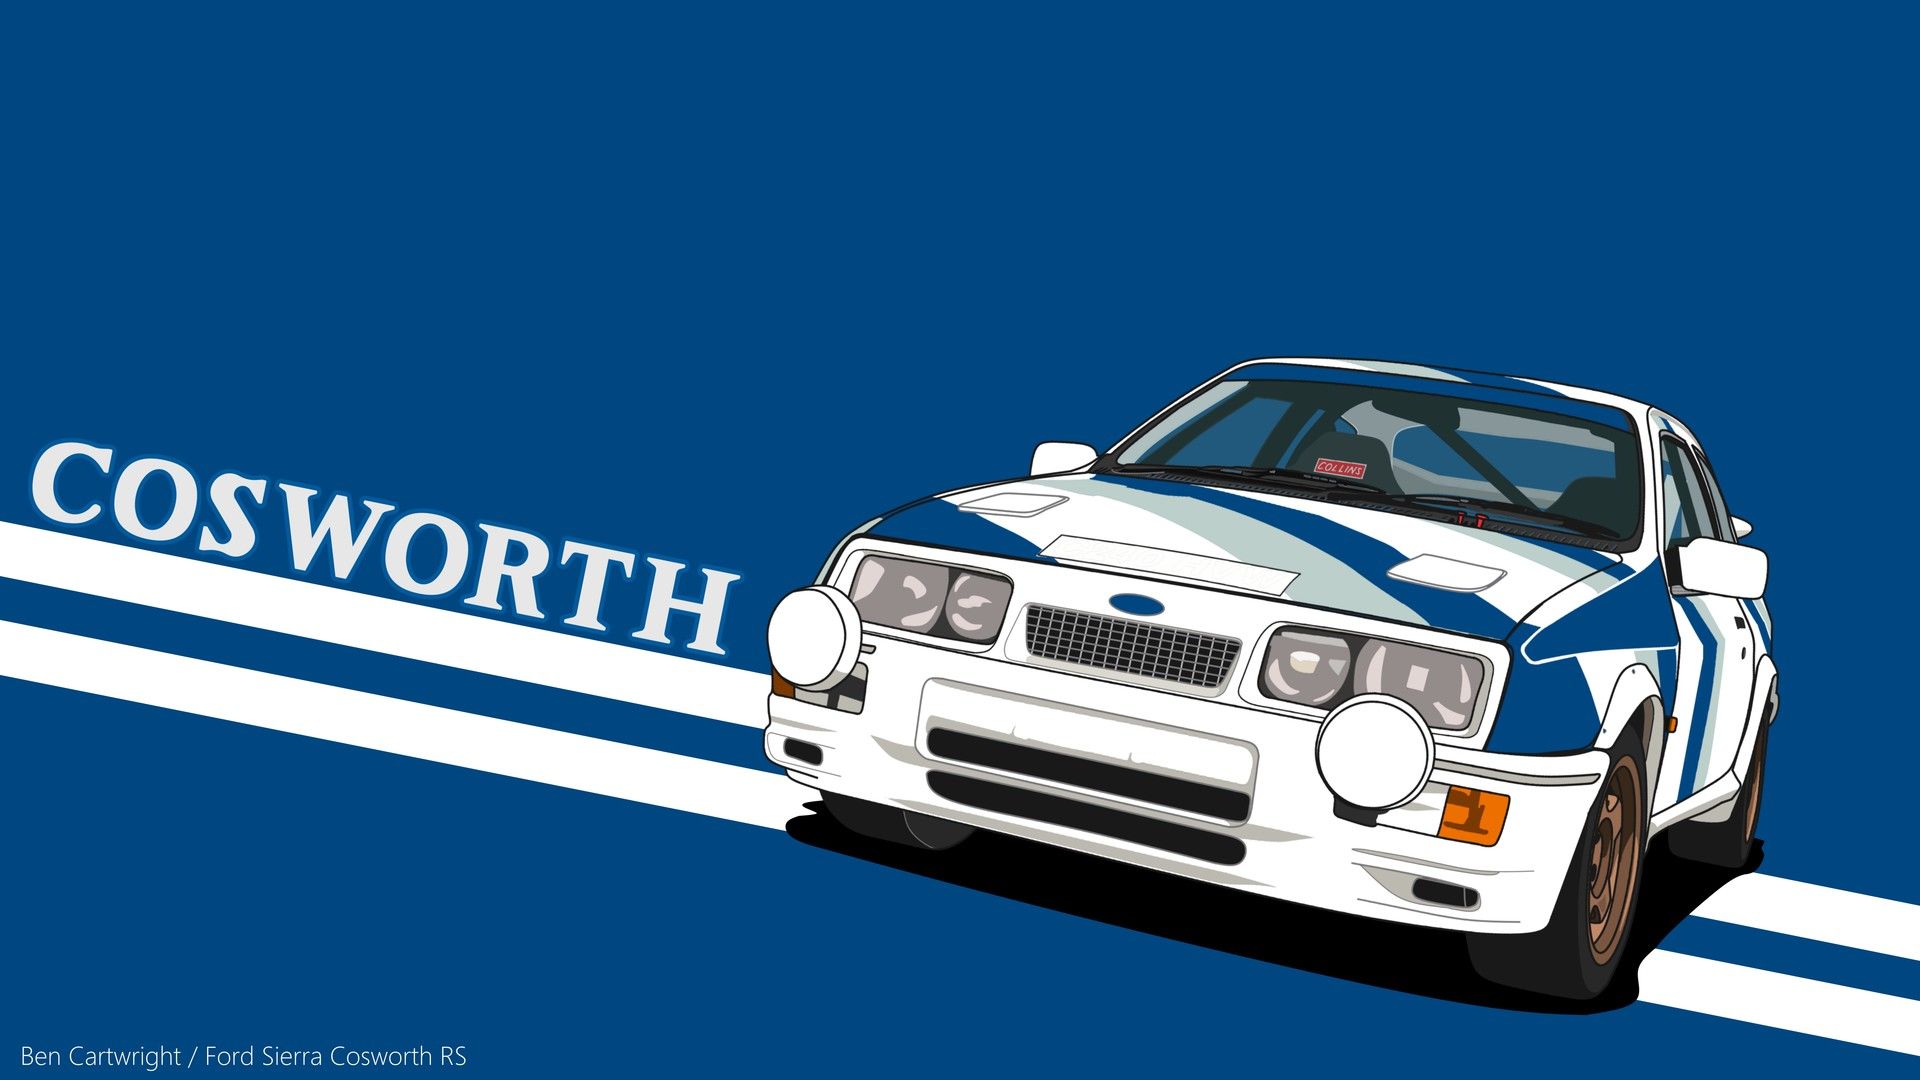 Cosworth Wallpaper Free Cosworth Background